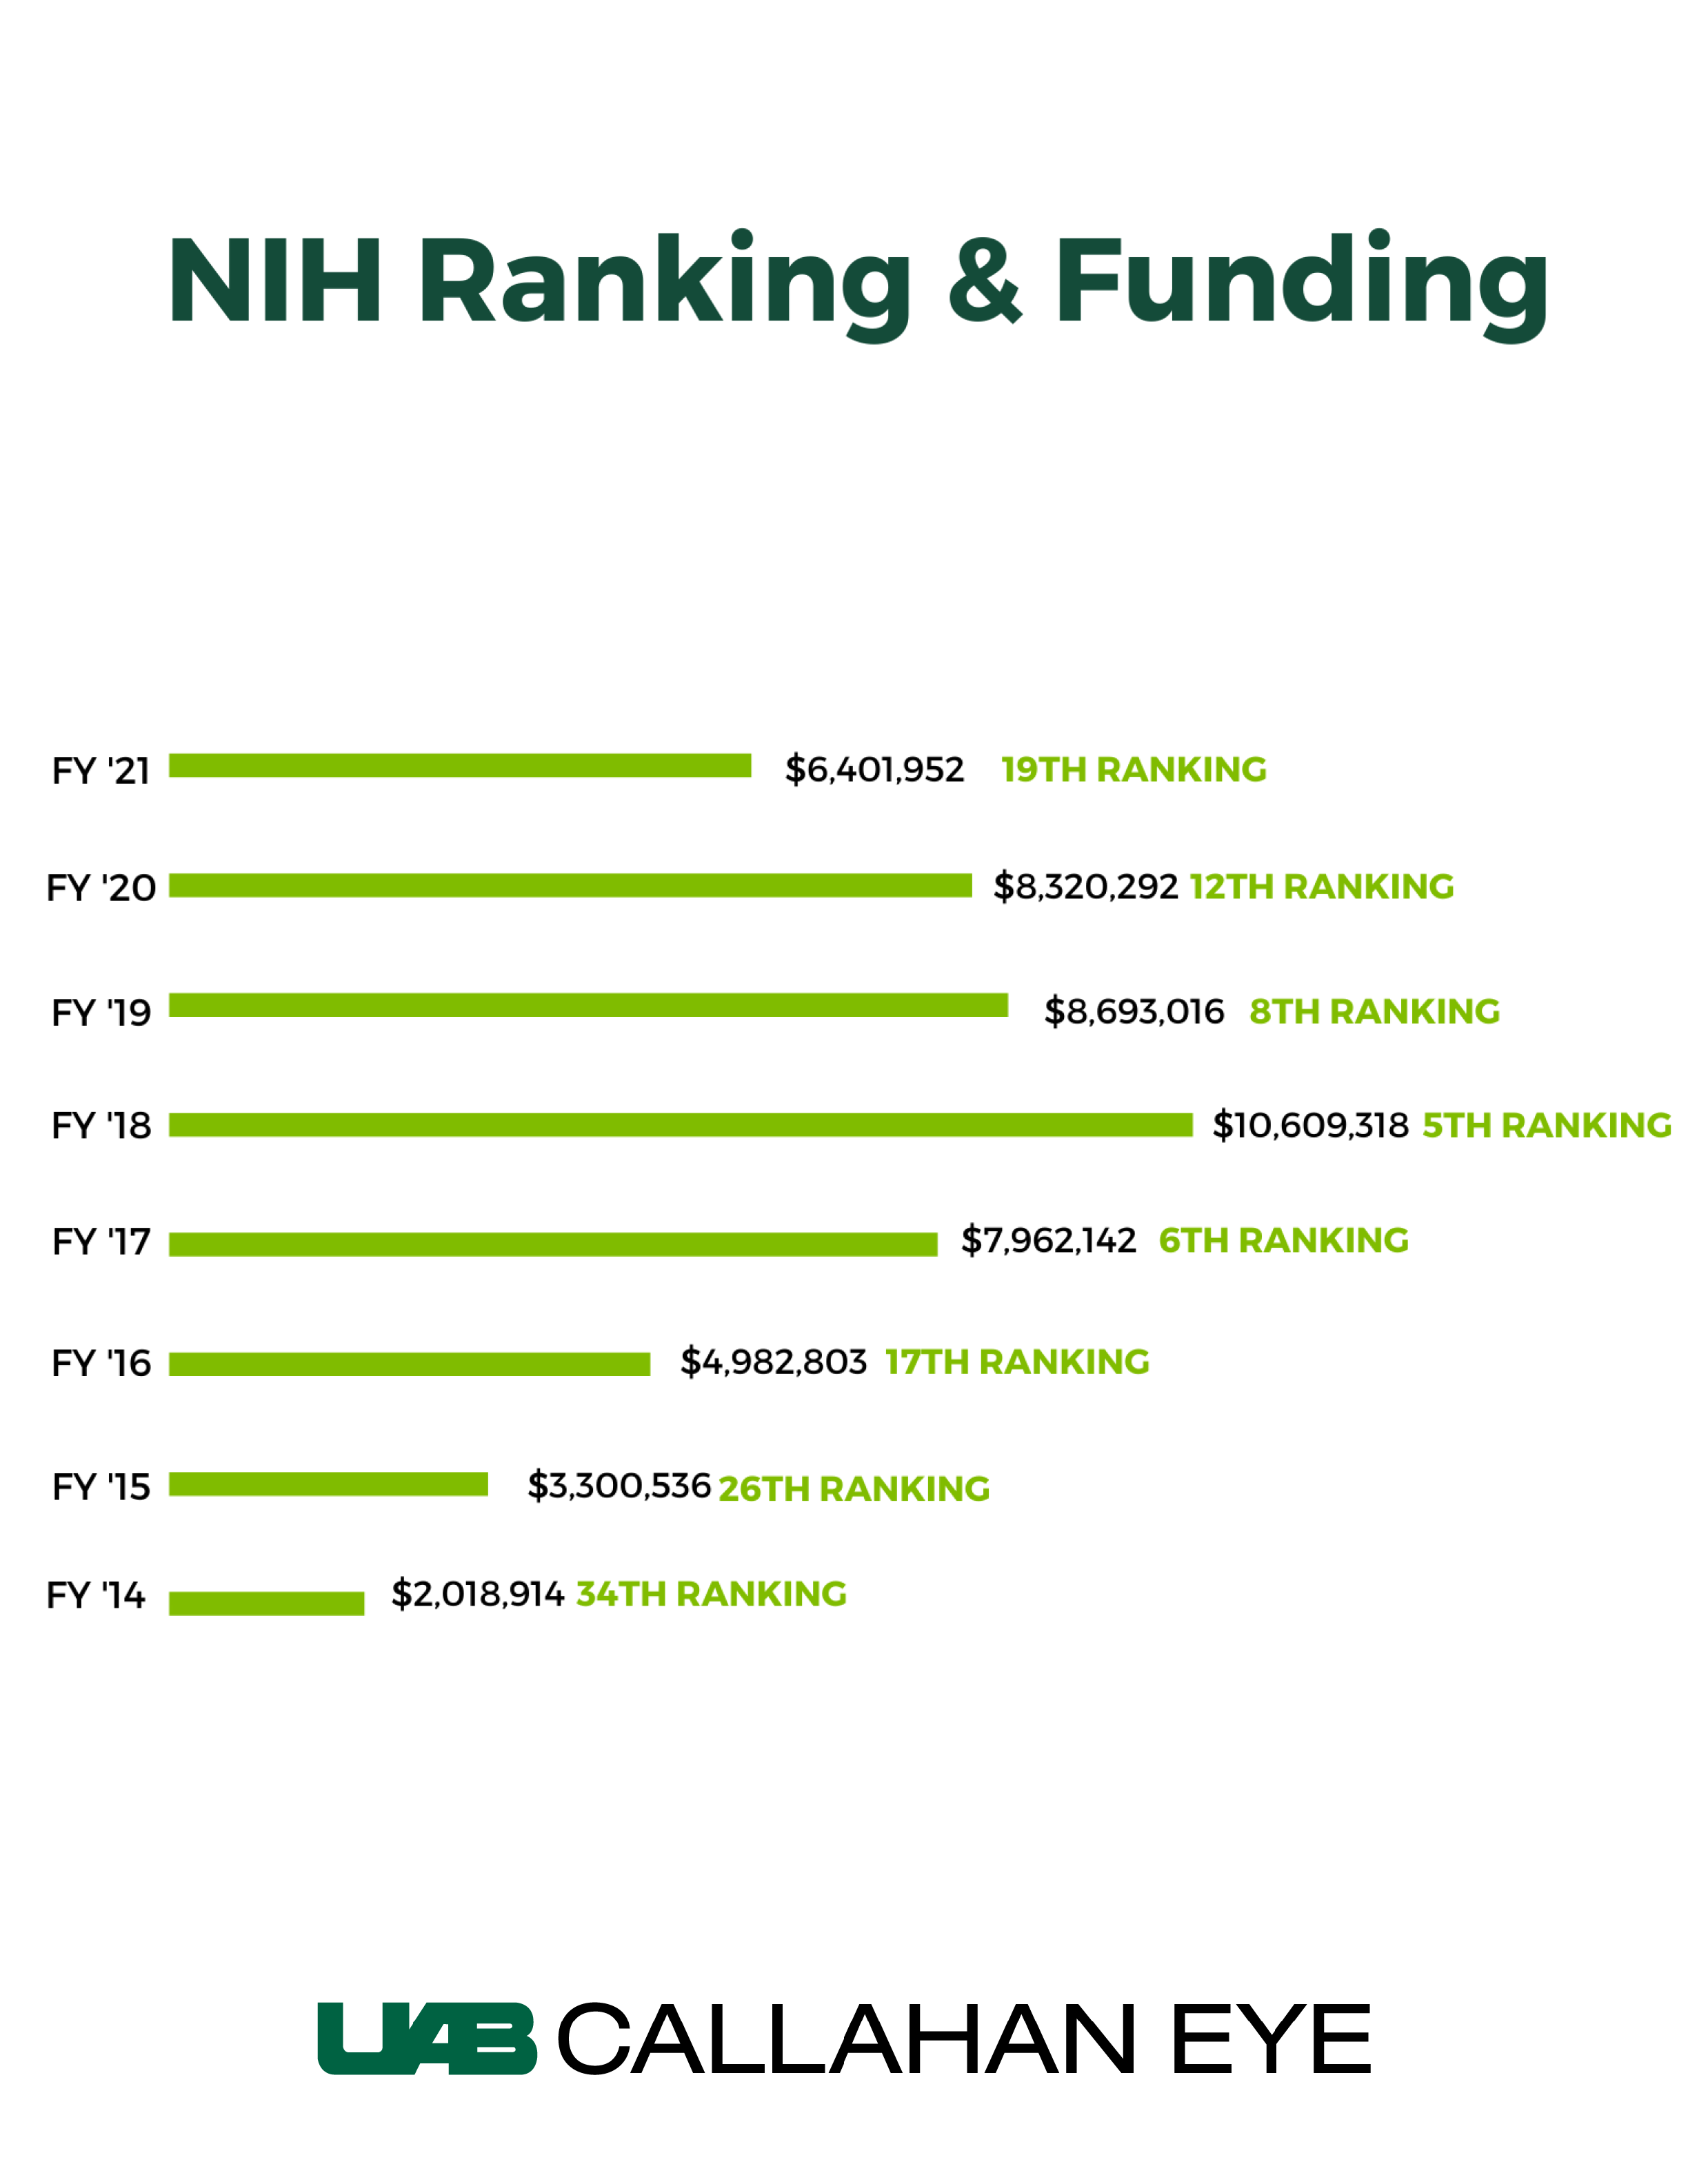 NIH Ranking and Funding